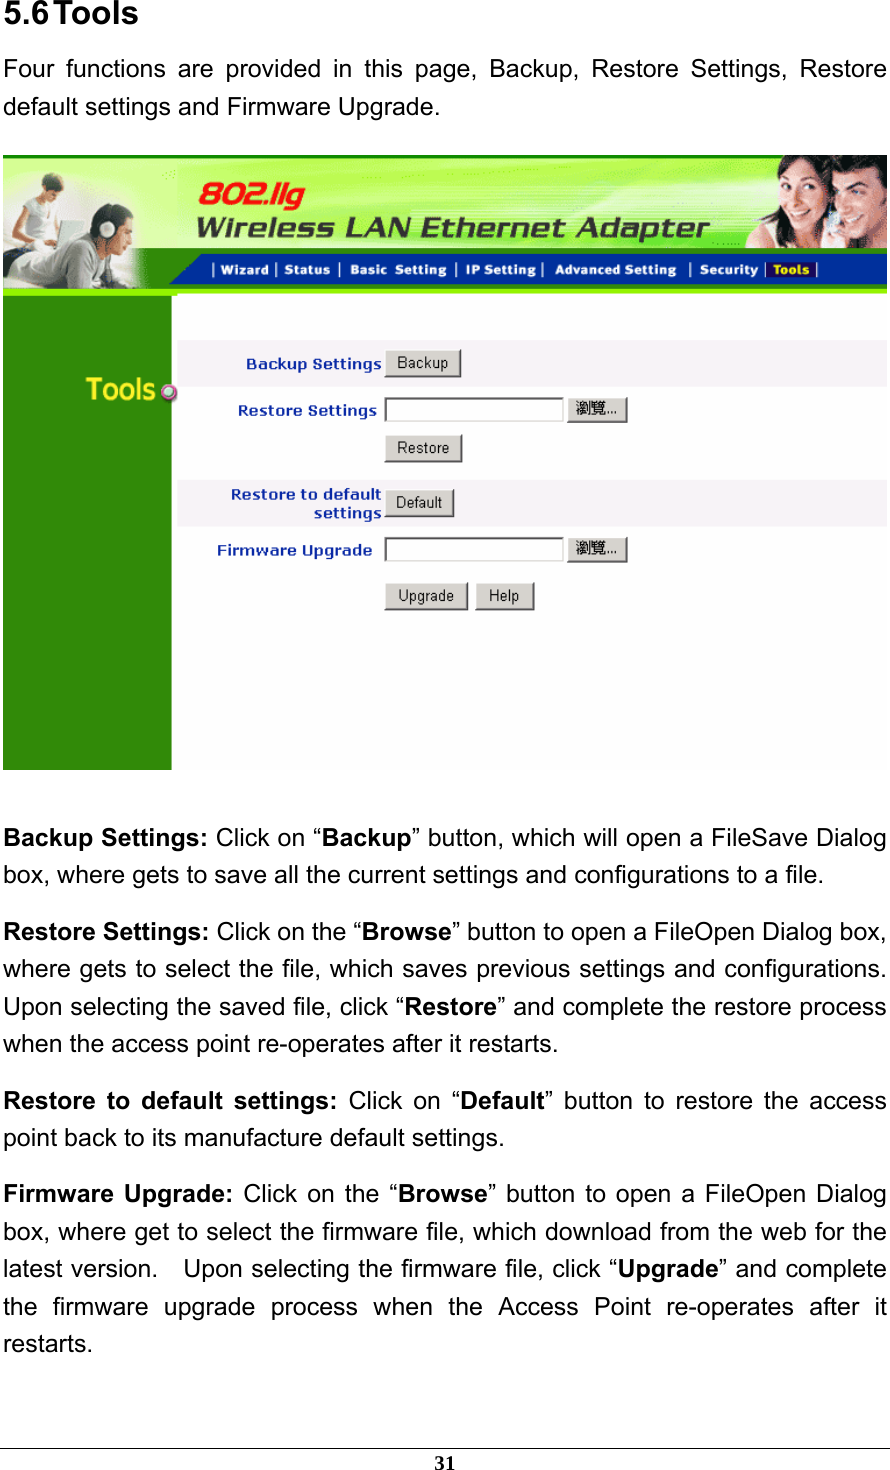 5.6 Tools Four functions are provided in this page, Backup, Restore Settings, Restore default settings and Firmware Upgrade.   Backup Settings: Click on “Backup” button, which will open a FileSave Dialog box, where gets to save all the current settings and configurations to a file. Restore Settings: Click on the “Browse” button to open a FileOpen Dialog box, where gets to select the file, which saves previous settings and configurations.   Upon selecting the saved file, click “Restore” and complete the restore process when the access point re-operates after it restarts. Restore to default settings: Click on “Default” button to restore the access point back to its manufacture default settings. Firmware Upgrade: Click on the “Browse” button to open a FileOpen Dialog box, where get to select the firmware file, which download from the web for the latest version.  Upon selecting the firmware file, click “Upgrade” and complete the firmware upgrade process when the Access Point re-operates after it restarts. 31 